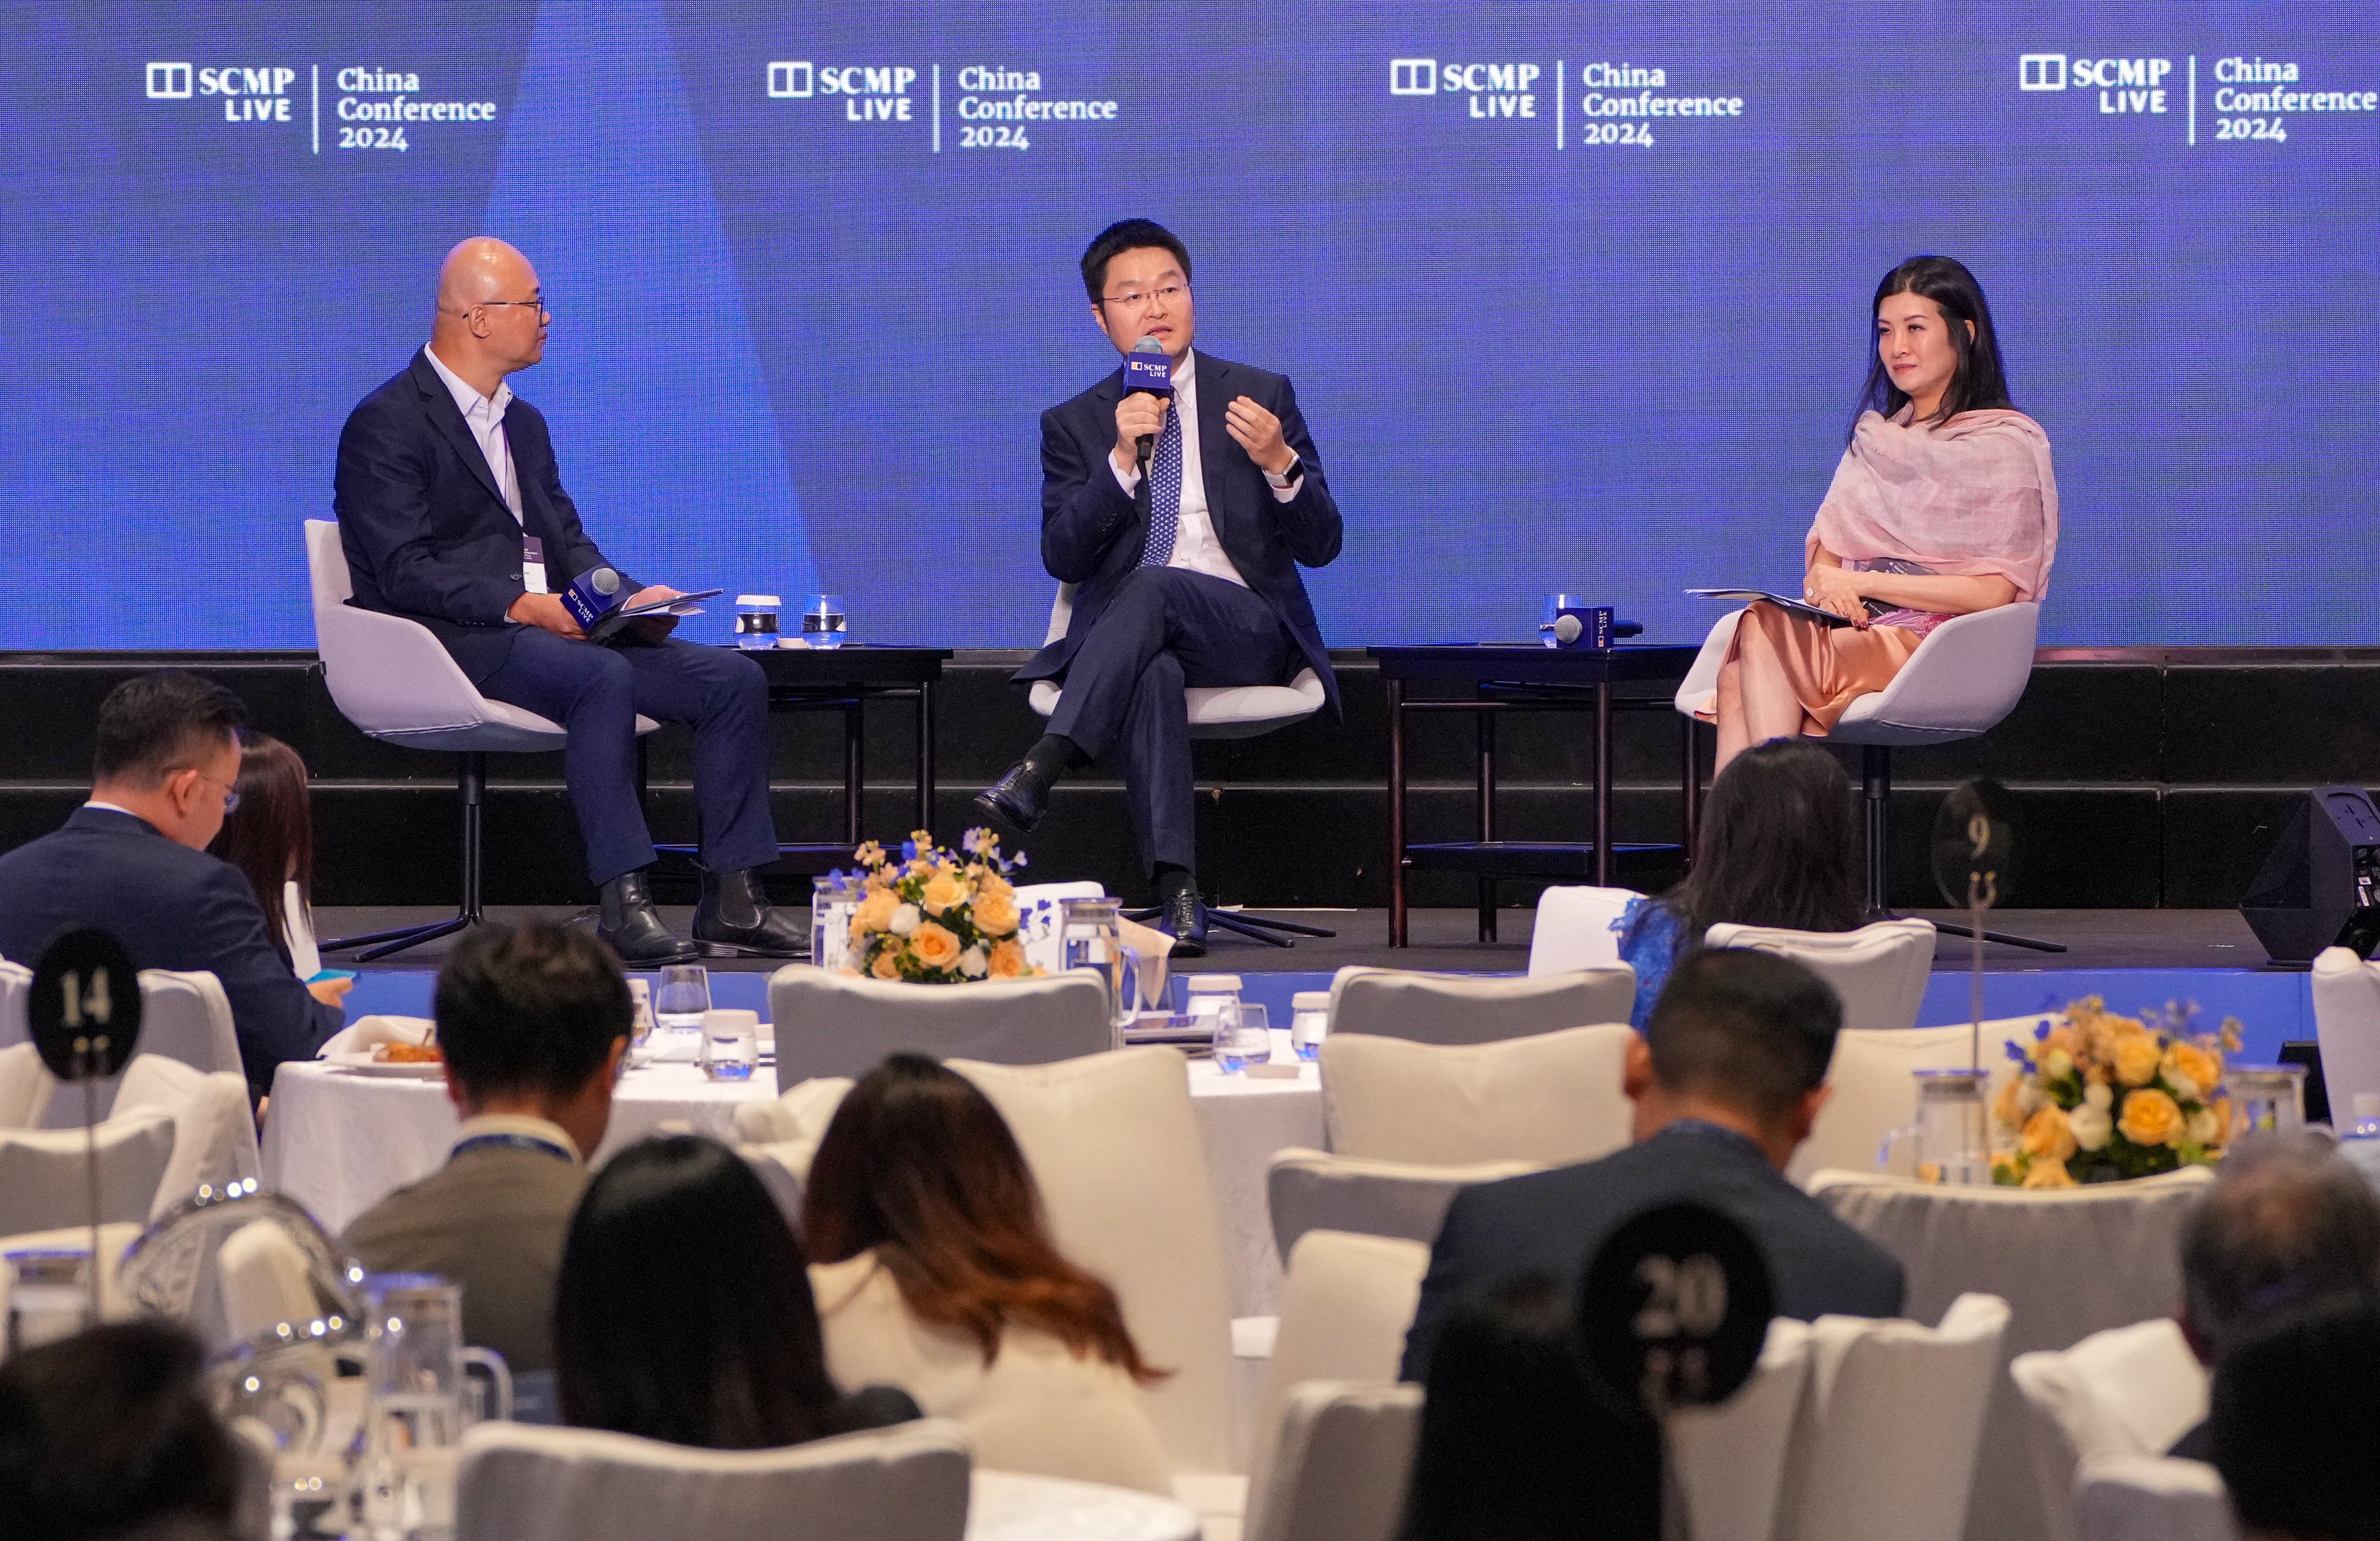 Henry He (centre), executive director and chief financial officer at Kingsoft Cloud, and Maryann Tseng (right), senior managing director of strategic investment at SenseTime, speak in a panel at the China Conference on Thursday. Photo: May Tse